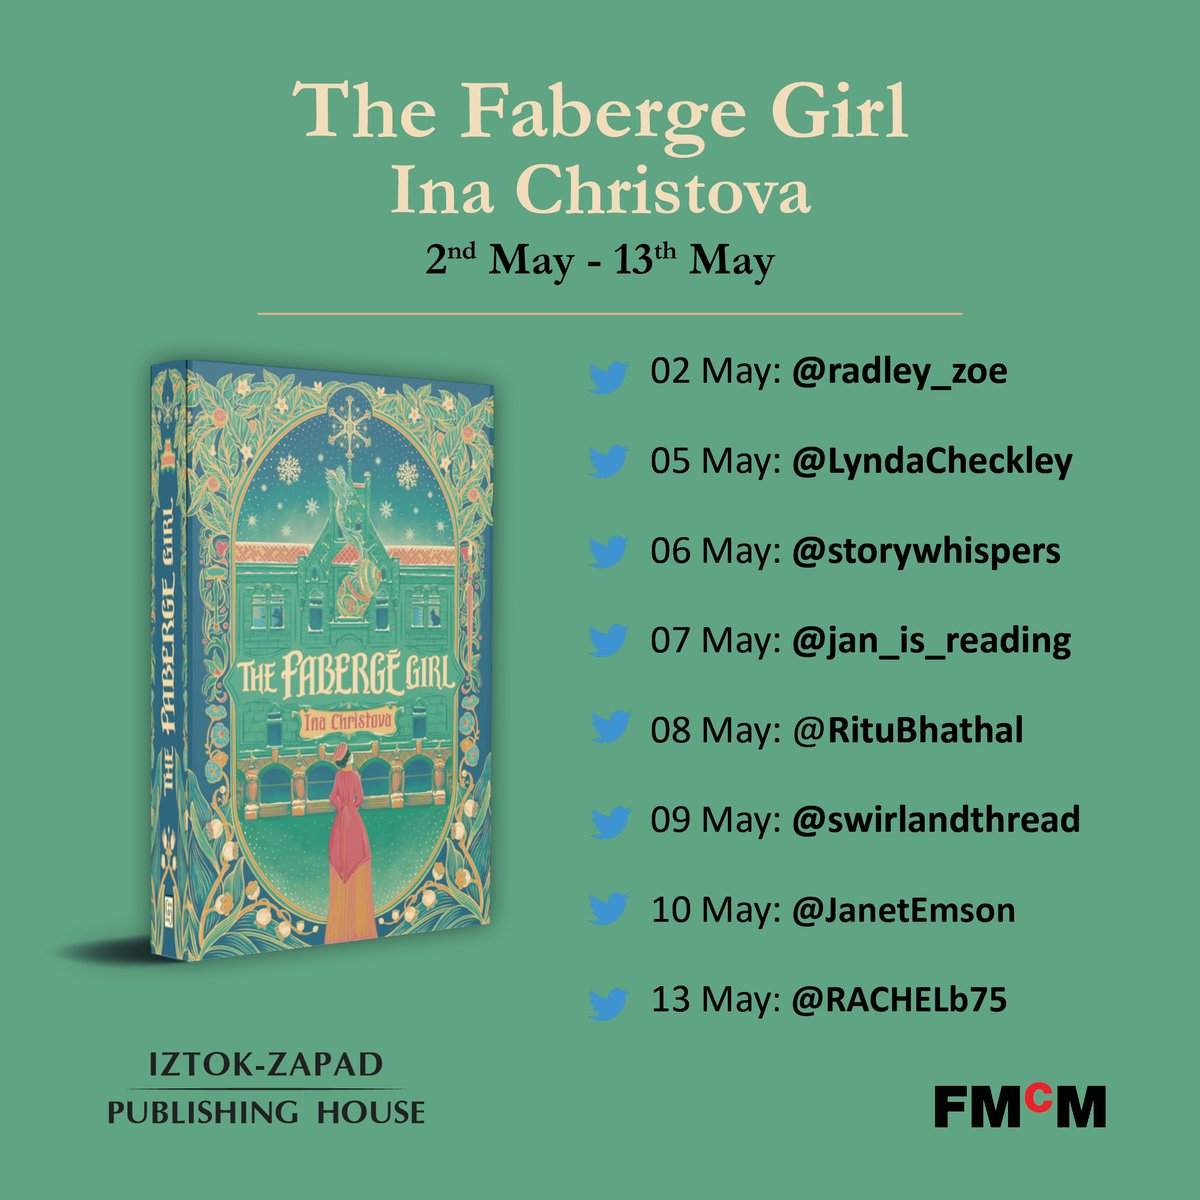 📗📗BOOK REVIEW 📗📗 The Faberge Girl by Ina Christova Full review ➡️ t.ly/uFoWt “A wonderful story of desire and determination and a strong and tenacious woman in Alma. A very enjoyable read.” @Ina_Christova @FMcMAssociates @Iztok_Zapad